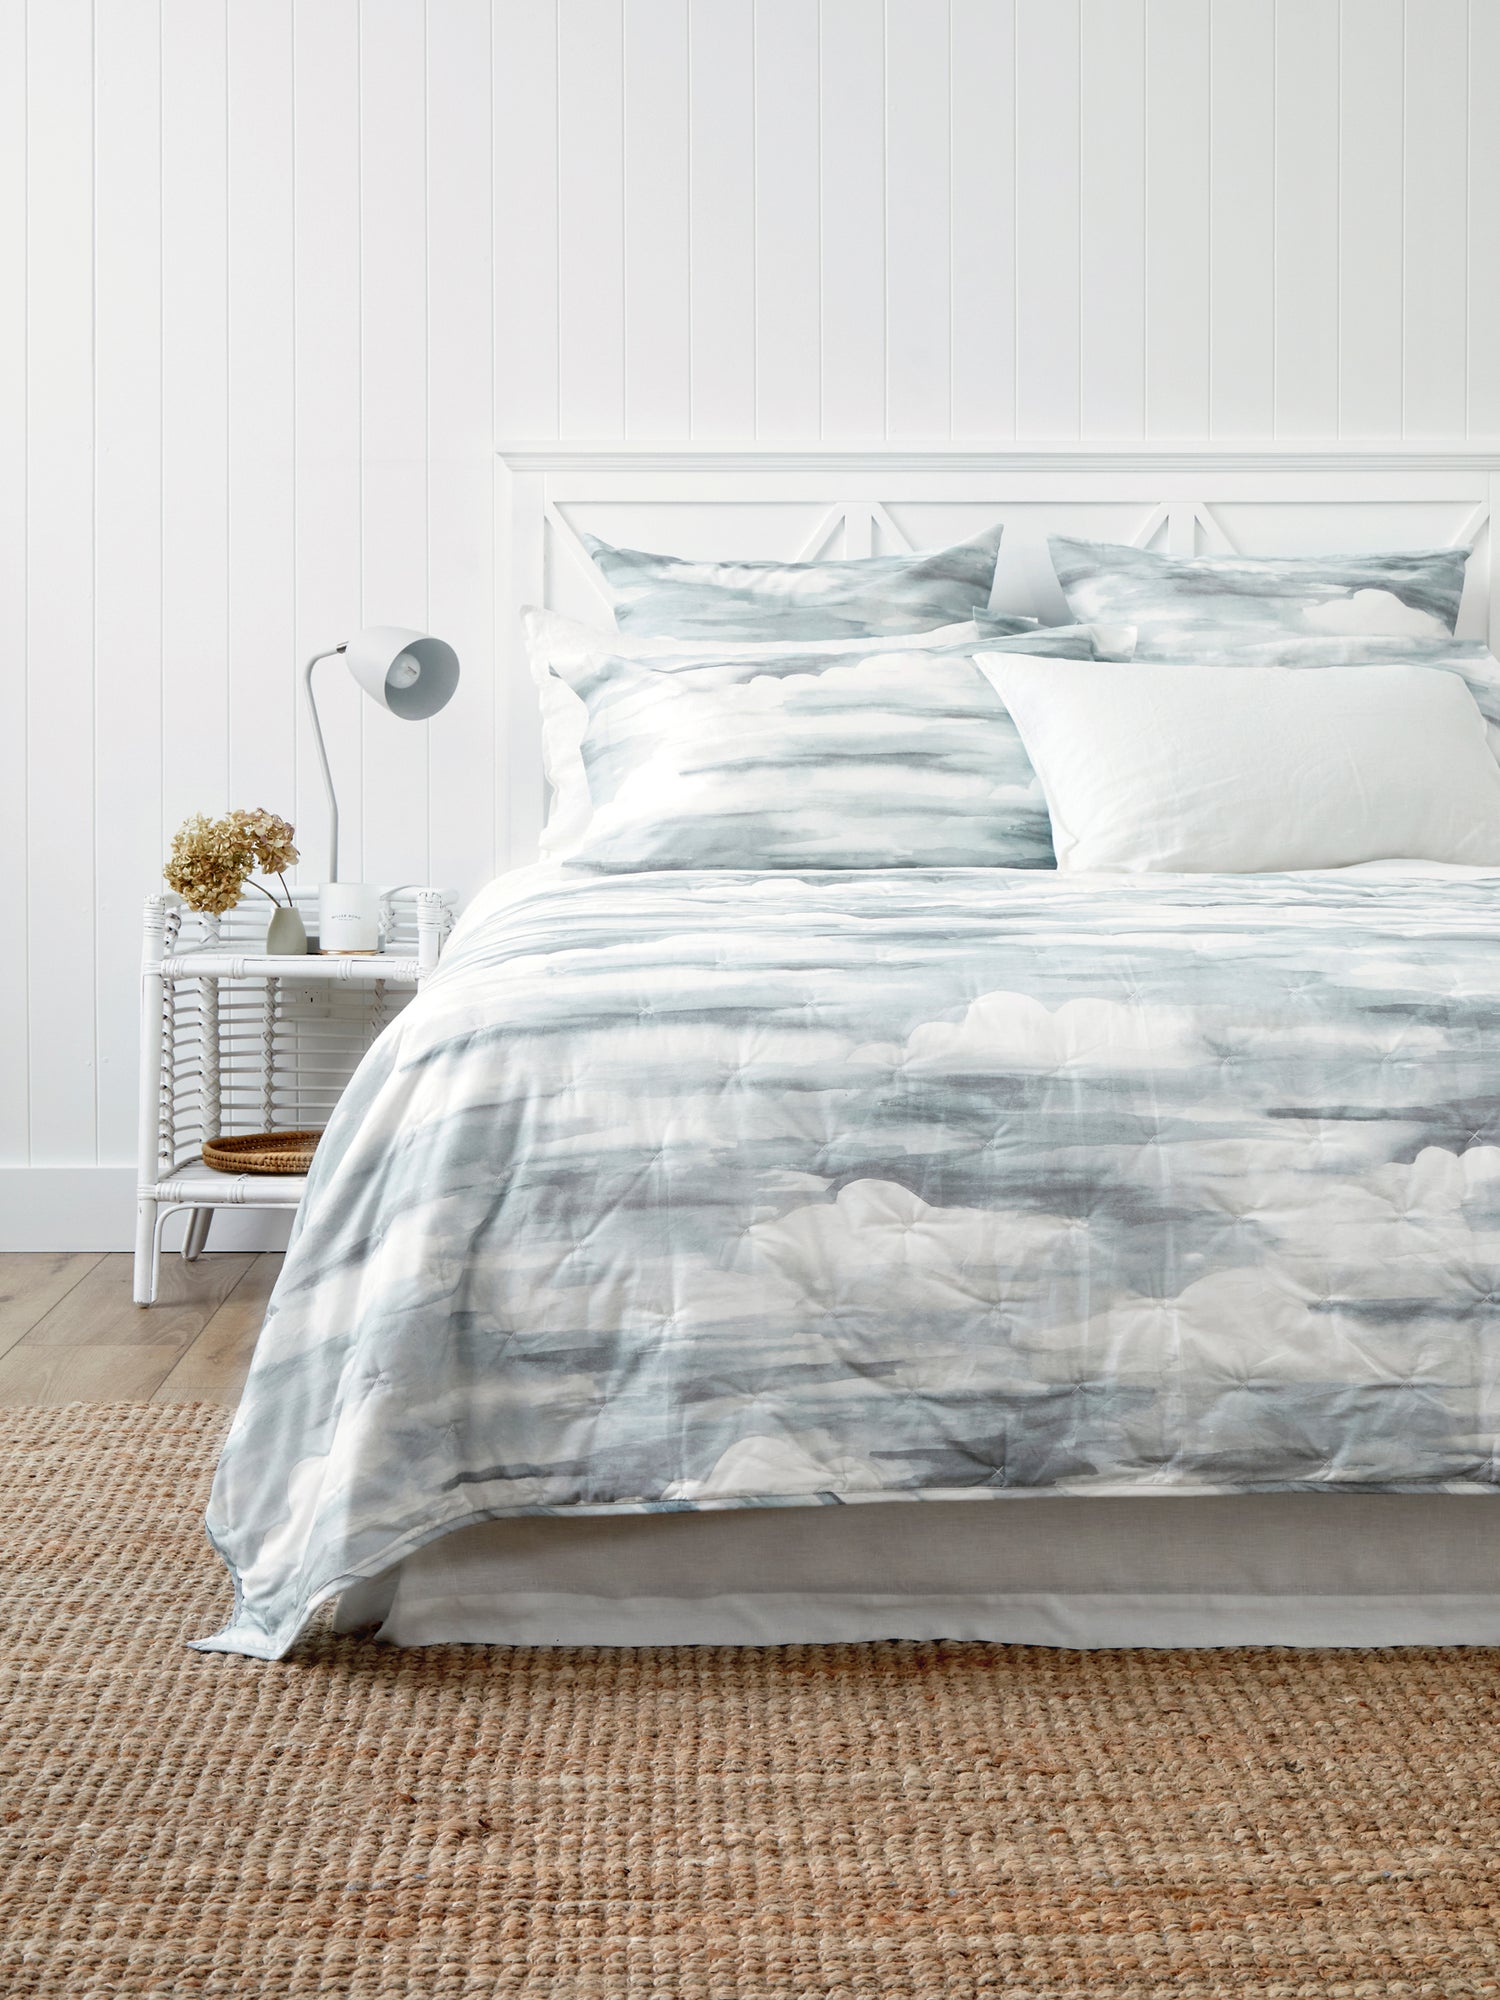 https://www.wallacecotton.com/content/products/dreamtime-organic-cotton-quilt-grey-1-9327.jpg?width=1500